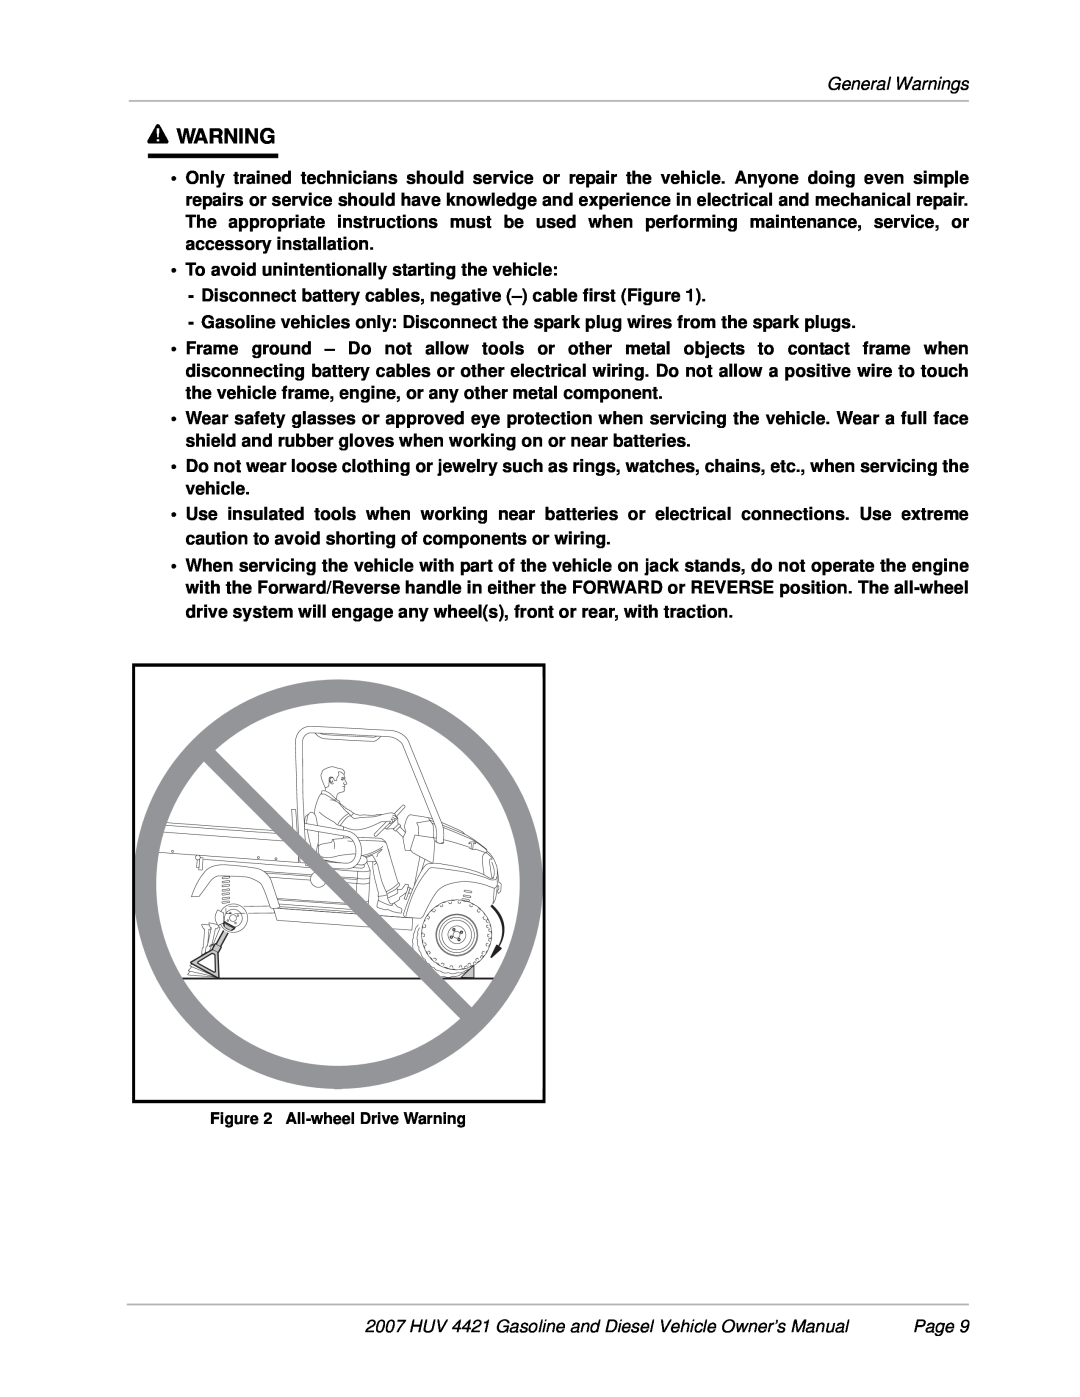 Husqvarna HUV 4421-D / DXP owner manual ý WARNING, General Warnings, To avoid unintentionally starting the vehicle, Page 